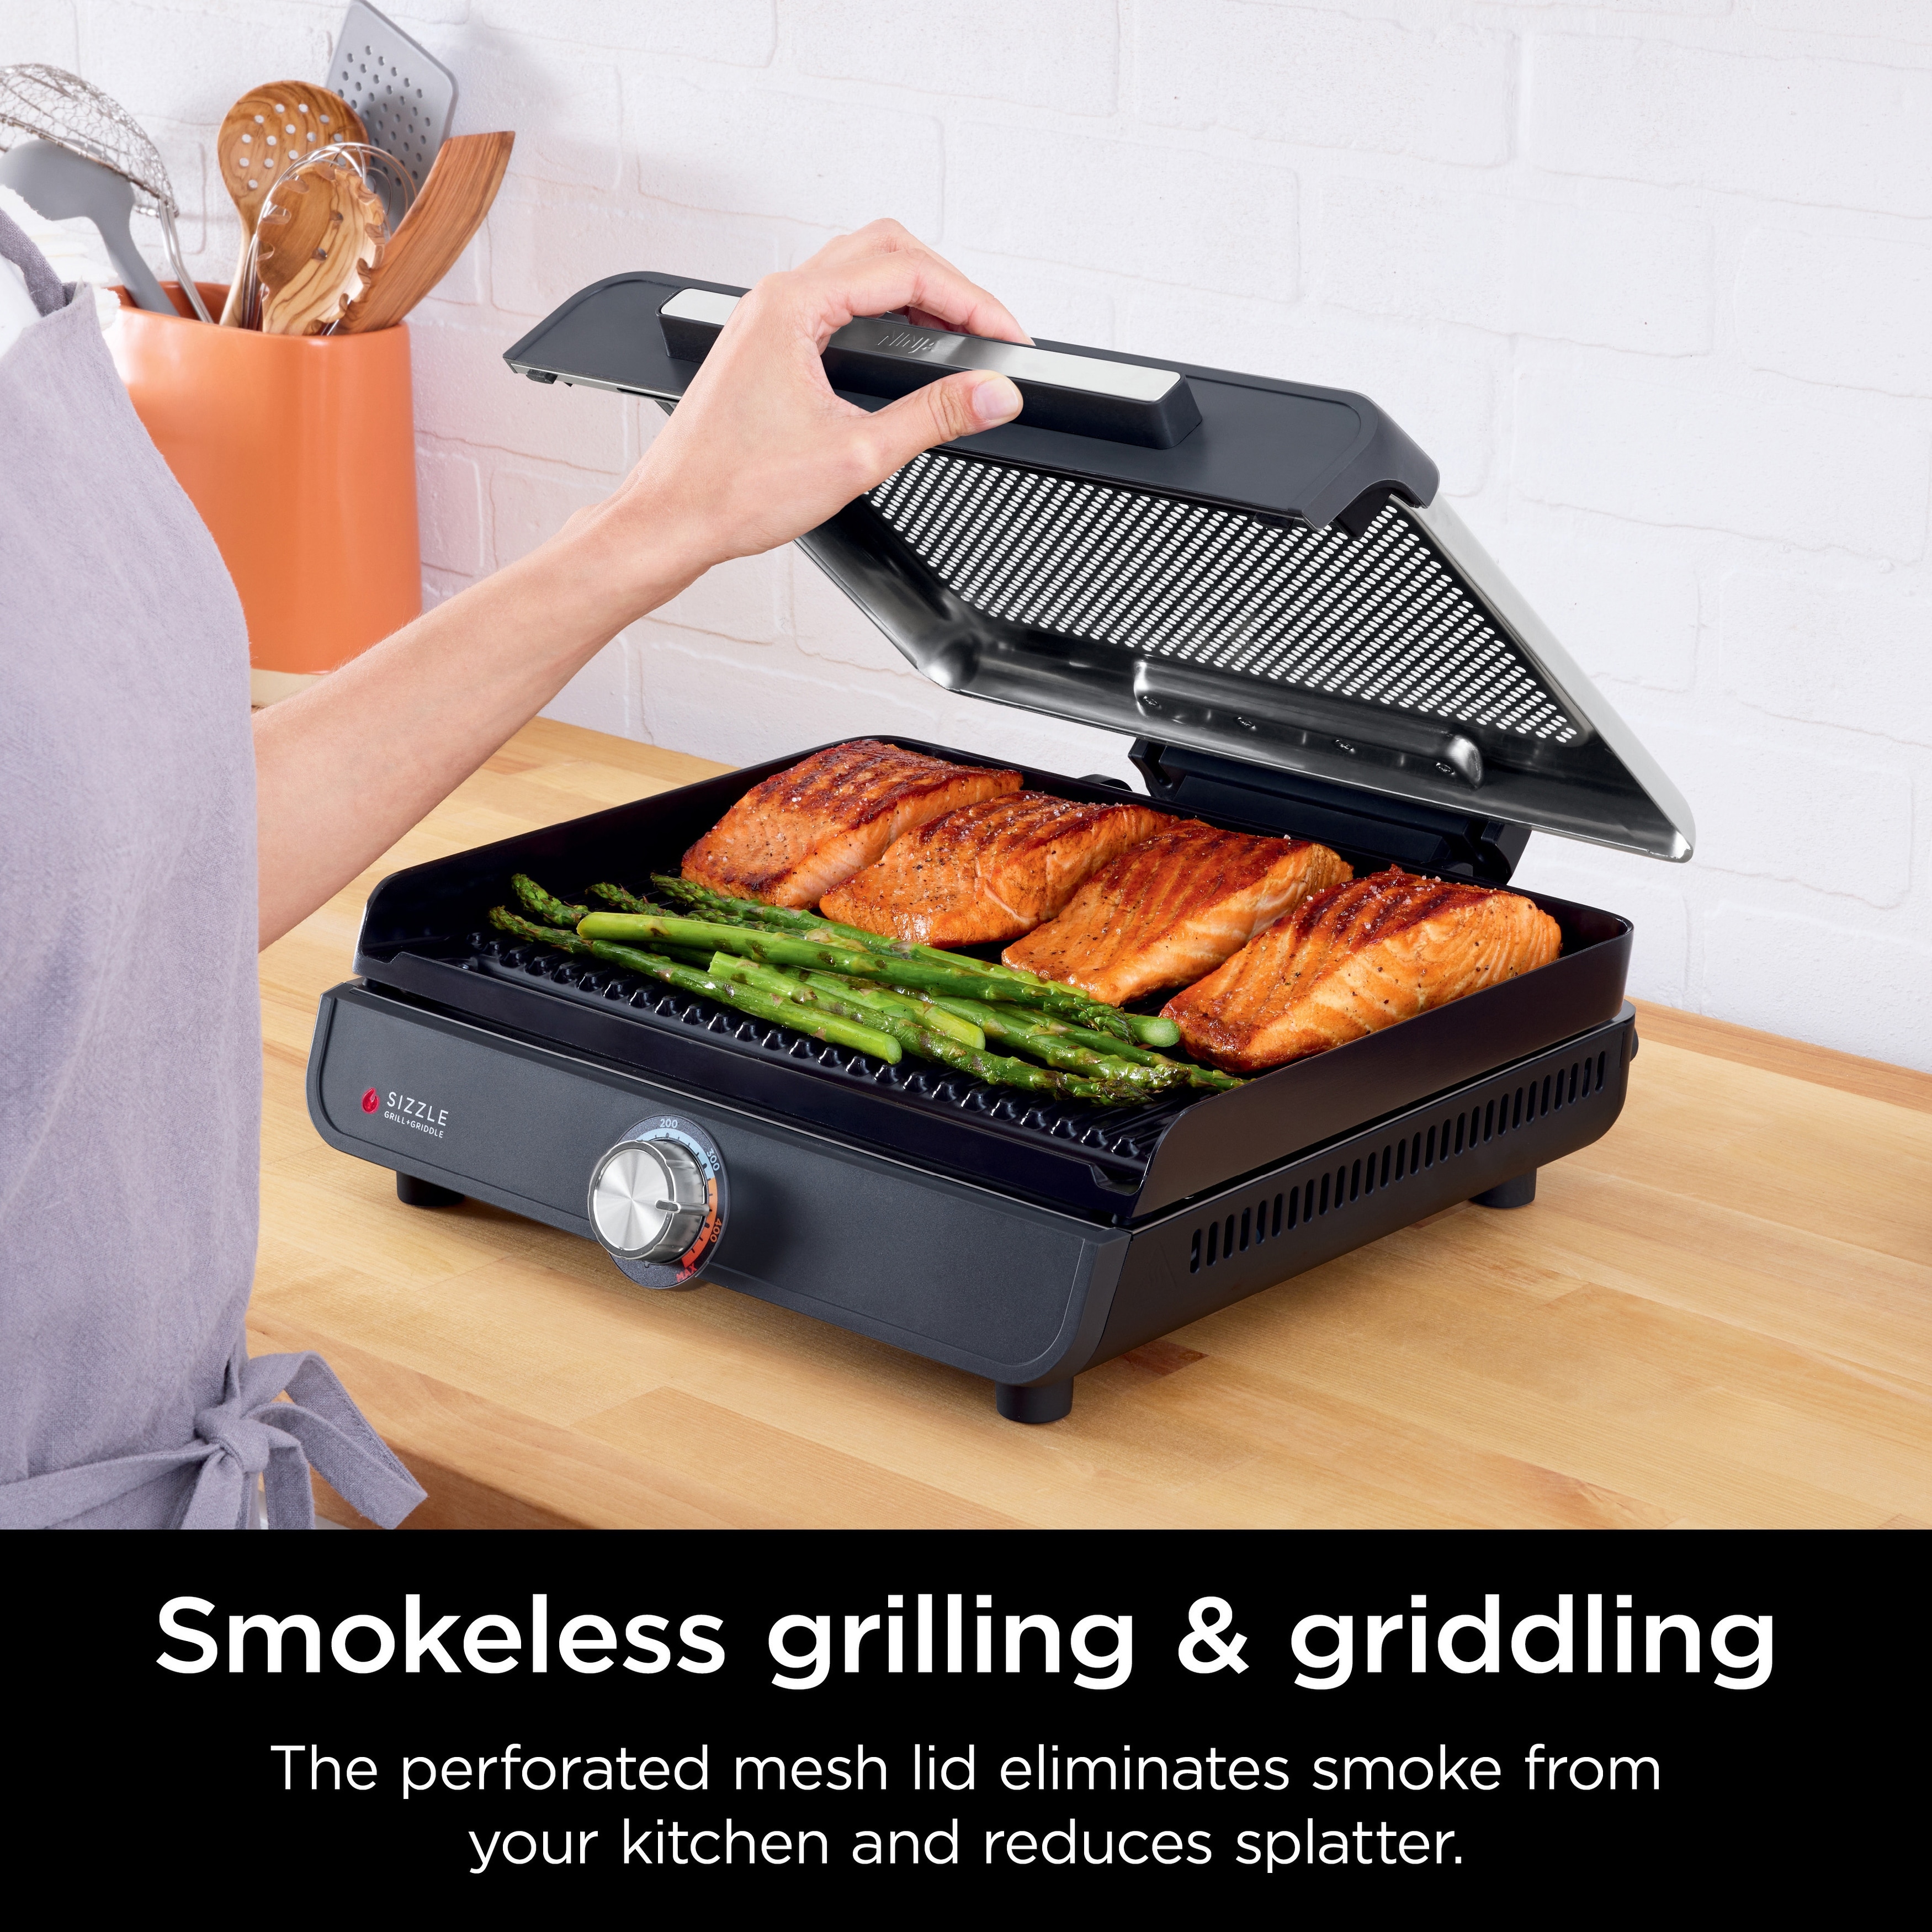 Ninja GR101 Sizzle Smokeless Indoor Grill & Griddle for Sale in Phoenix, AZ  - OfferUp